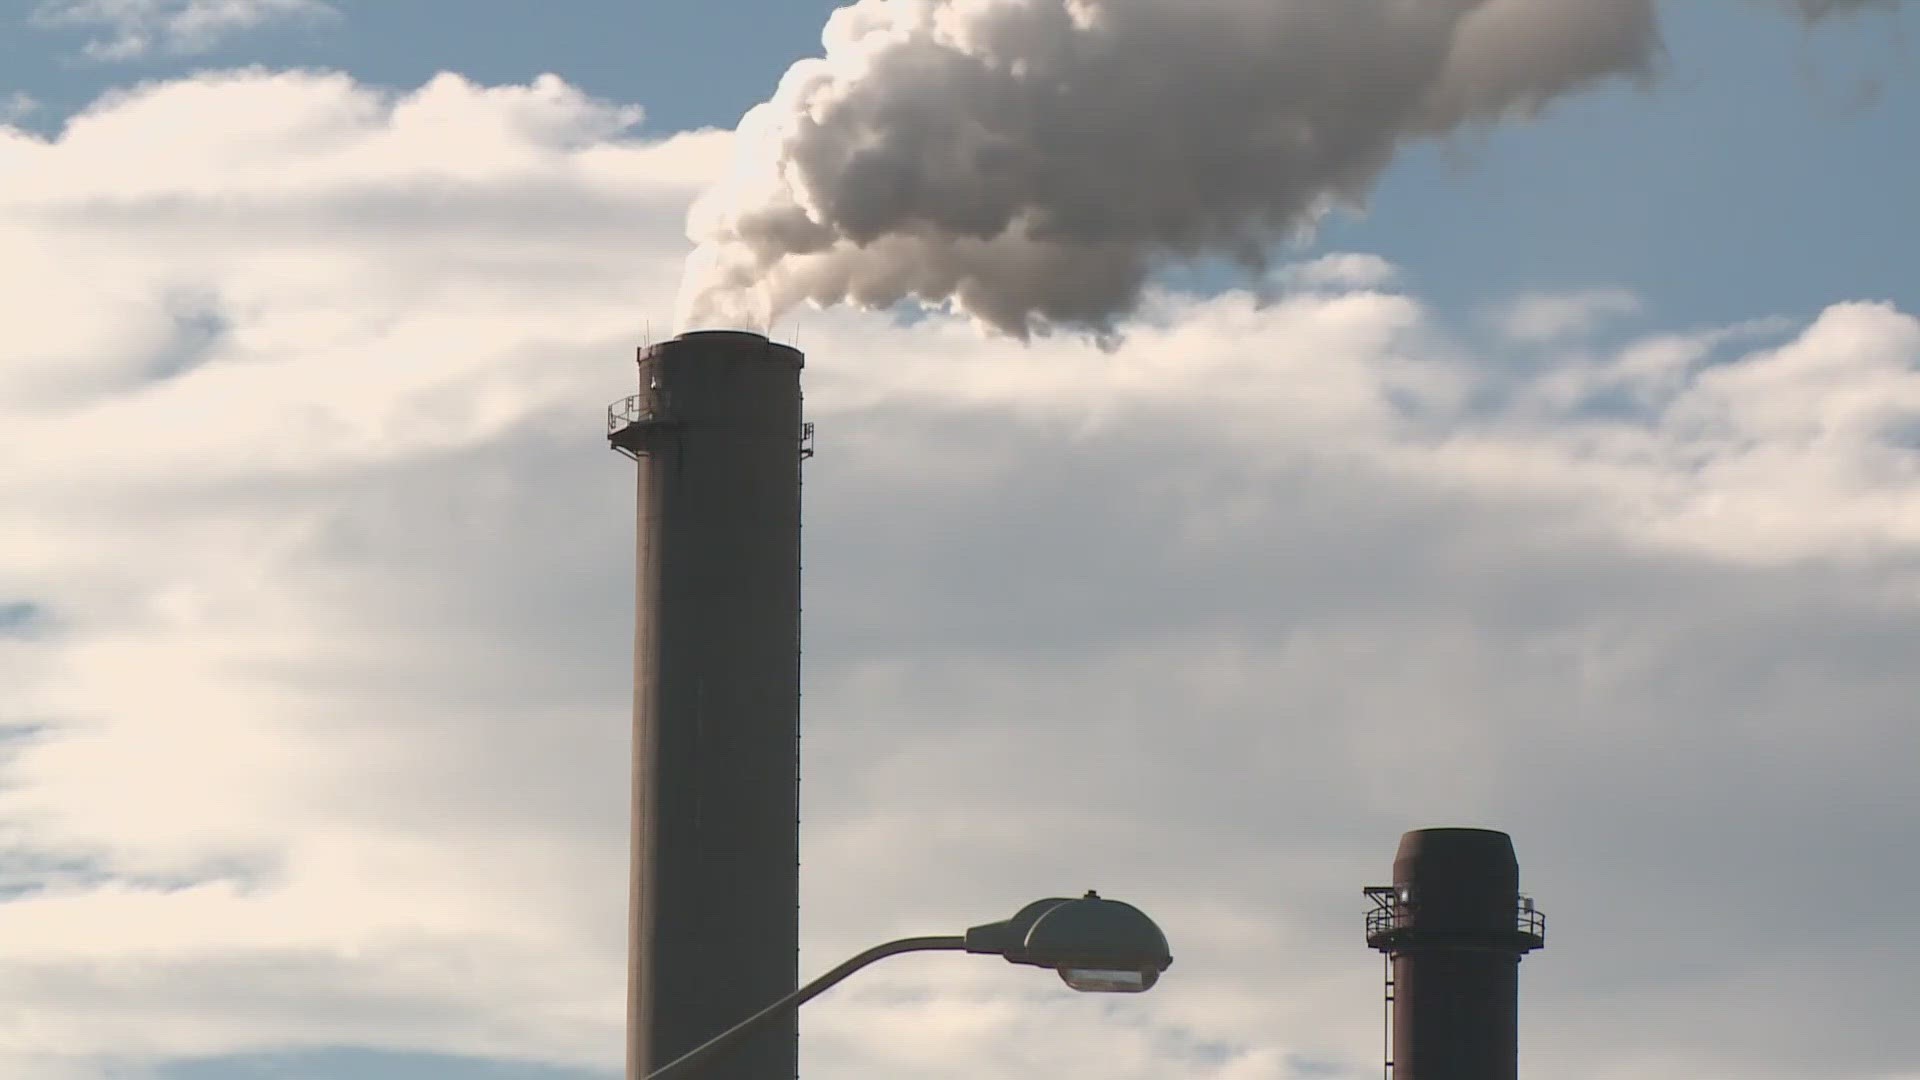 The Legislature's labor and housing committee held a public hearing Thursday on a bill that aims to limit forced overtime for employees at pulp and paper mills.